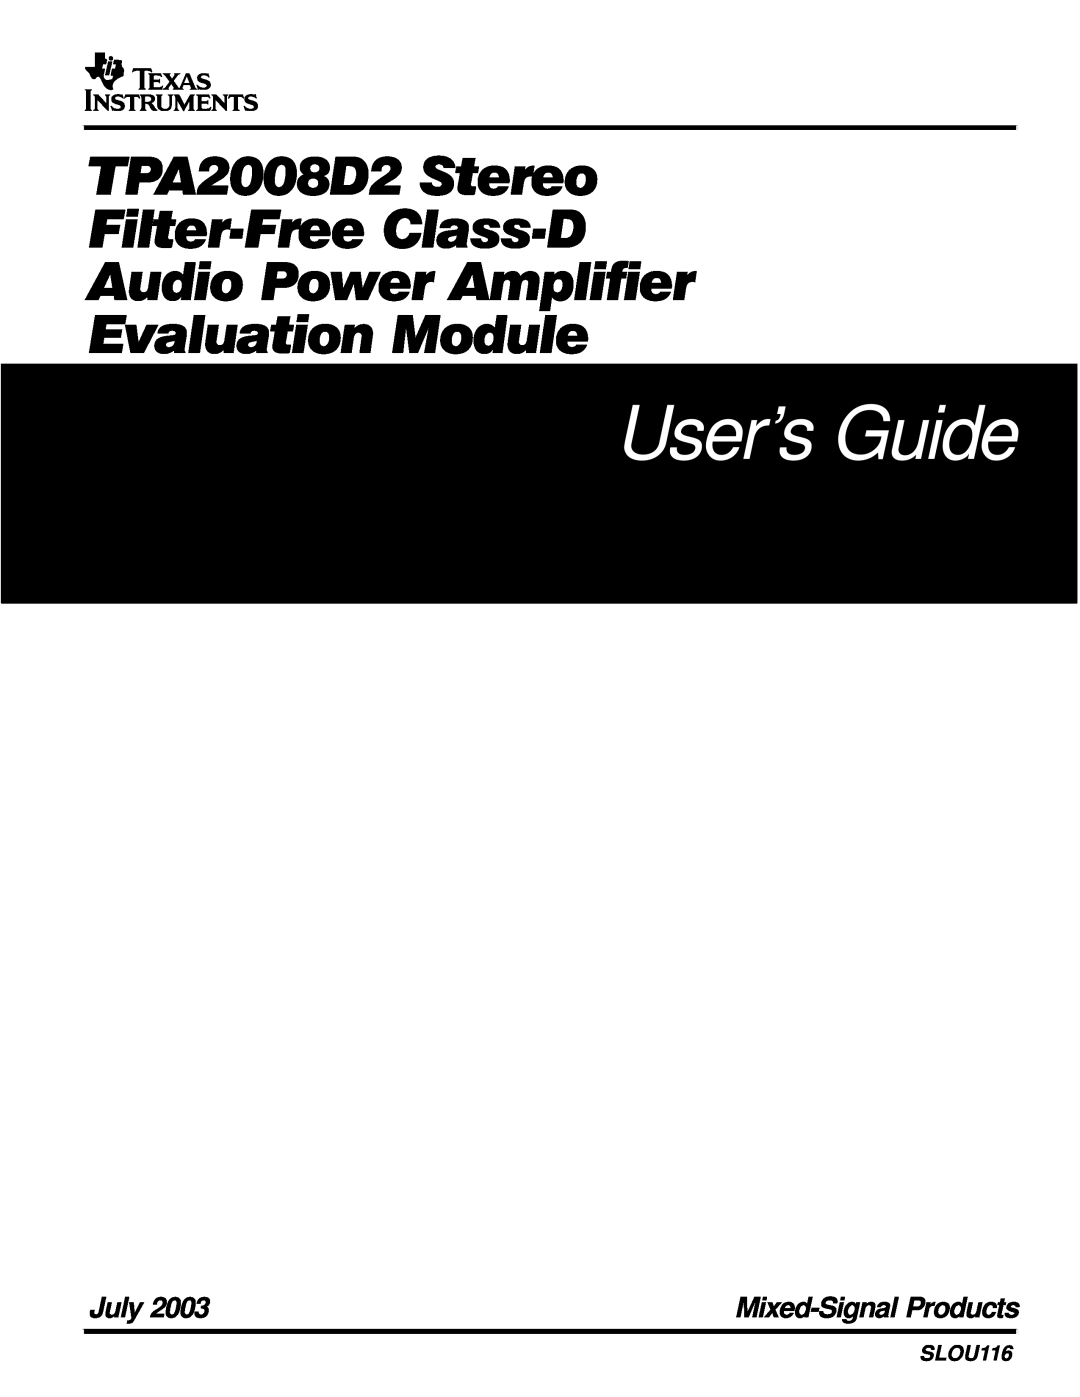 Texas Instruments TPA2008D2 manual User’s Guide, July, Mixed-SignalProducts, SLOU116 